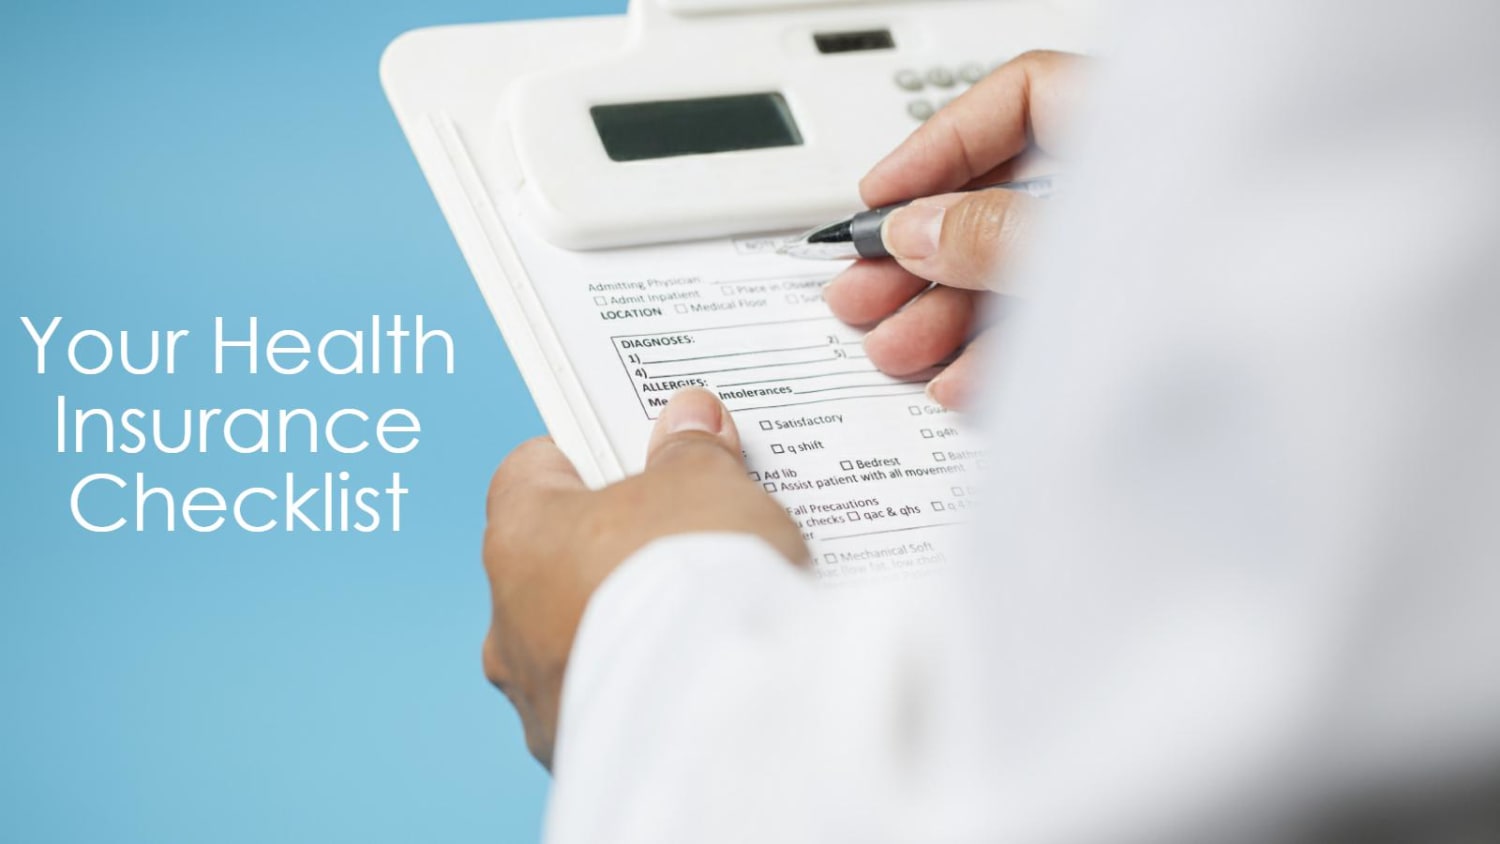 5 Things to Consider Before Buying Health Insurance